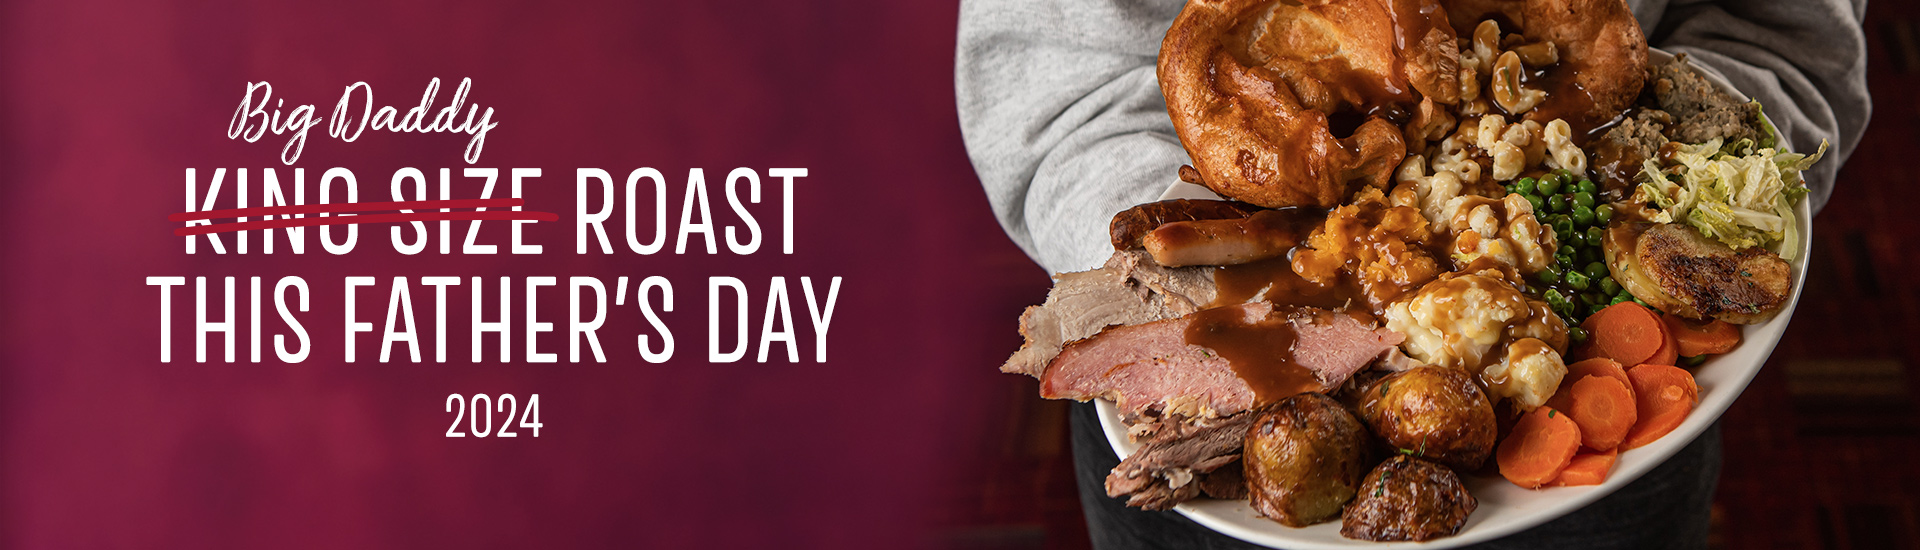 Father’s day carvery in Northampton, Father’s day at Toby Carvery East Hunsbury